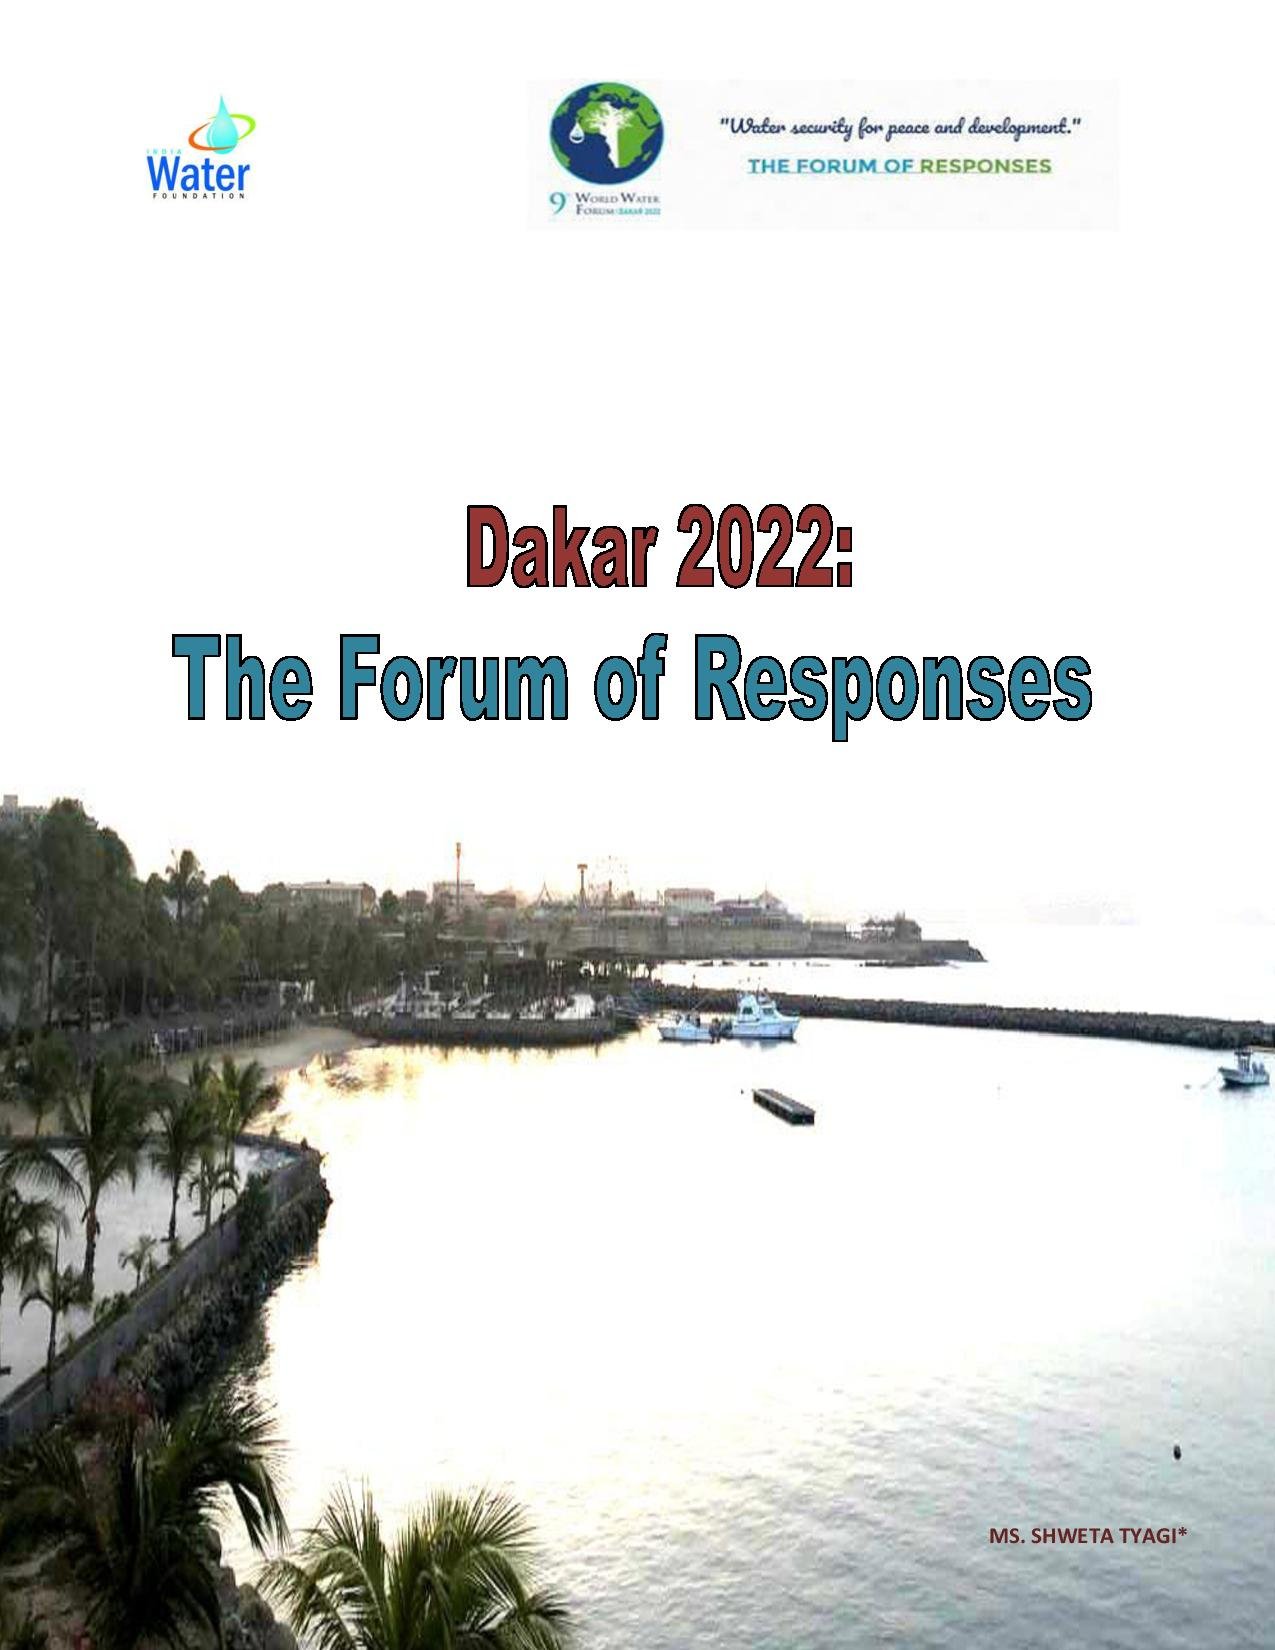 The Forum for peace and development, the 9th world water Forum through an innovative framework identified, promoted and implemented concrete res...